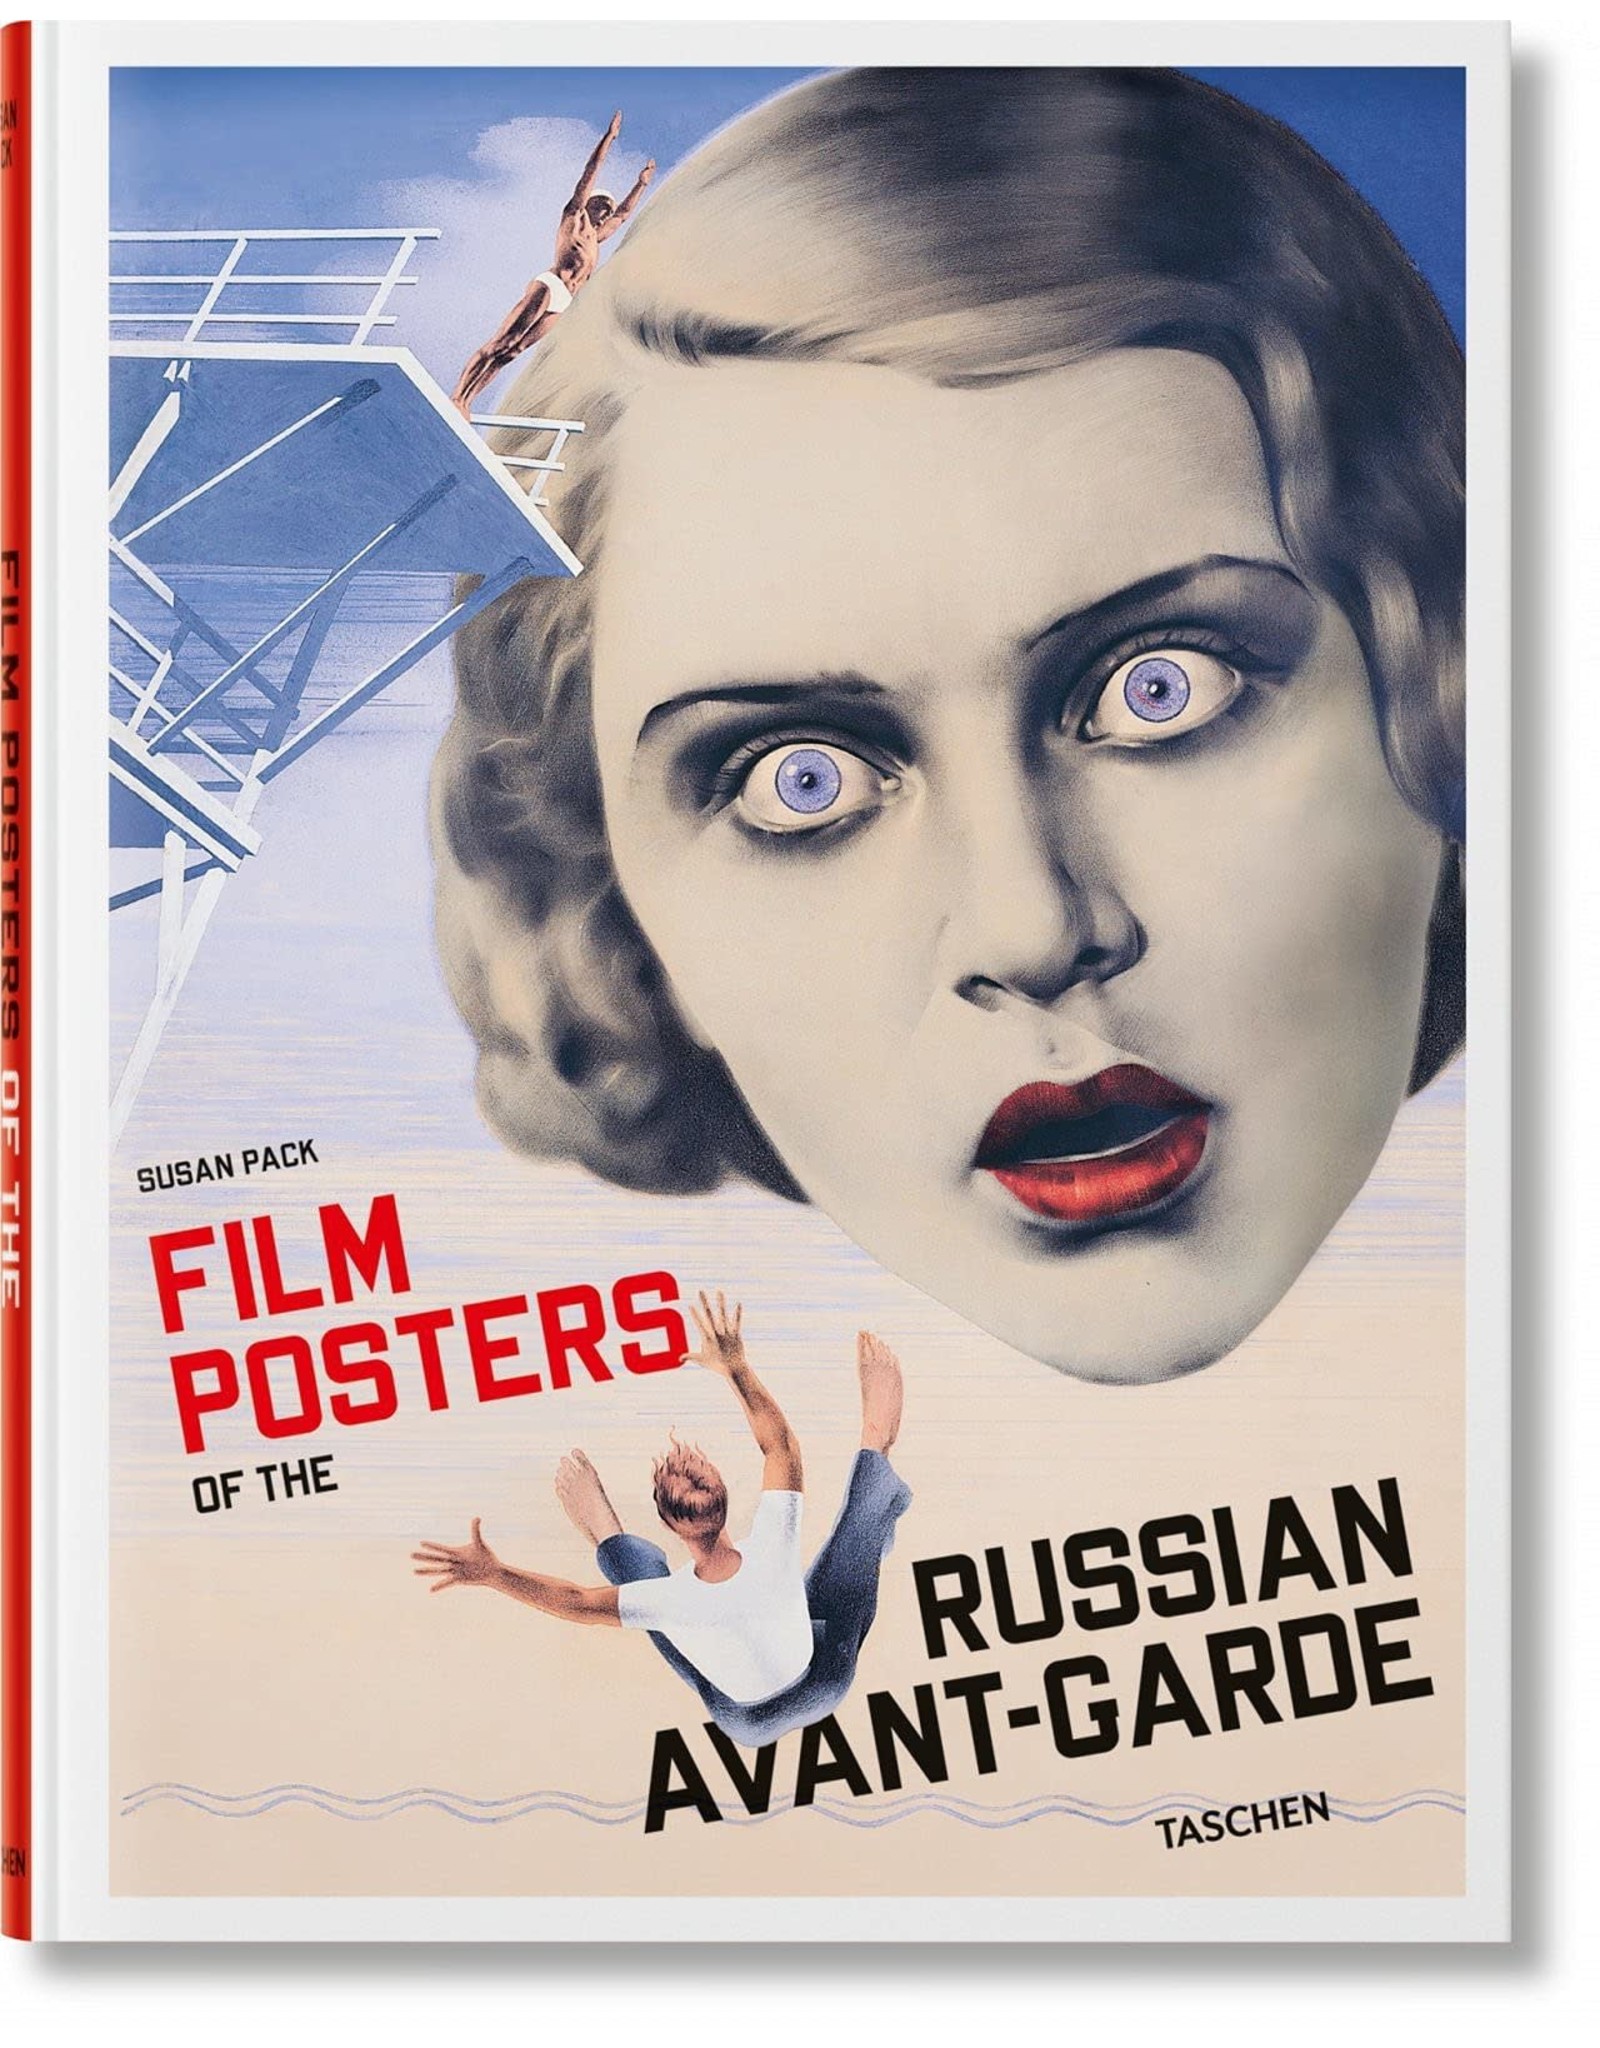 Film Posters of the Russian Avant -Garde